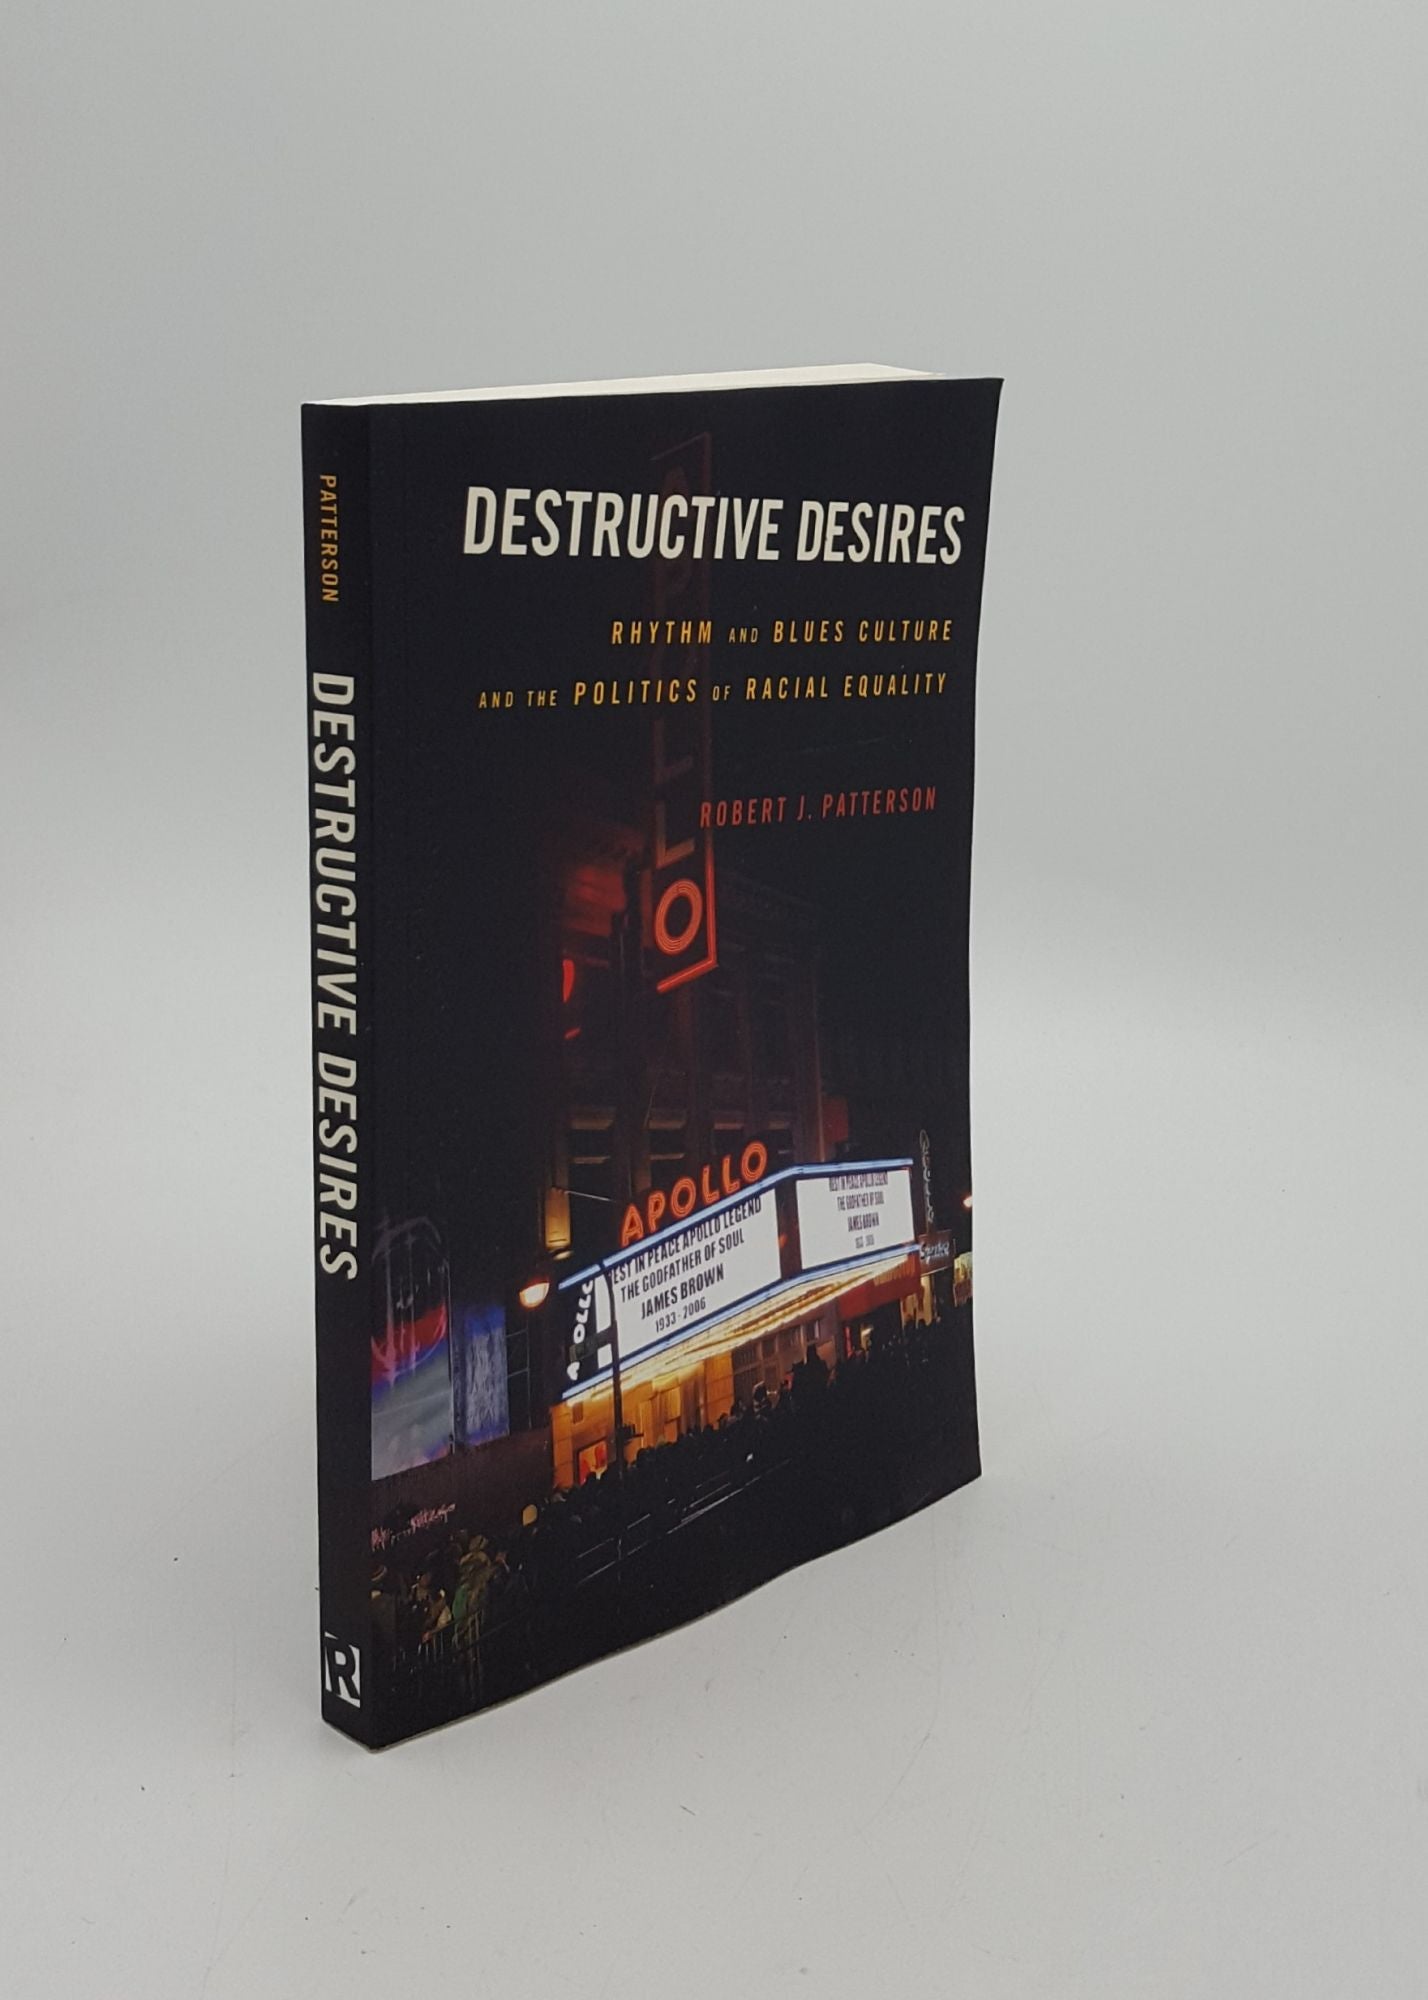 PATTERSON Robert J. - Destructive Desires Rhythm and Blues Culture and the Politics of Racial Equality